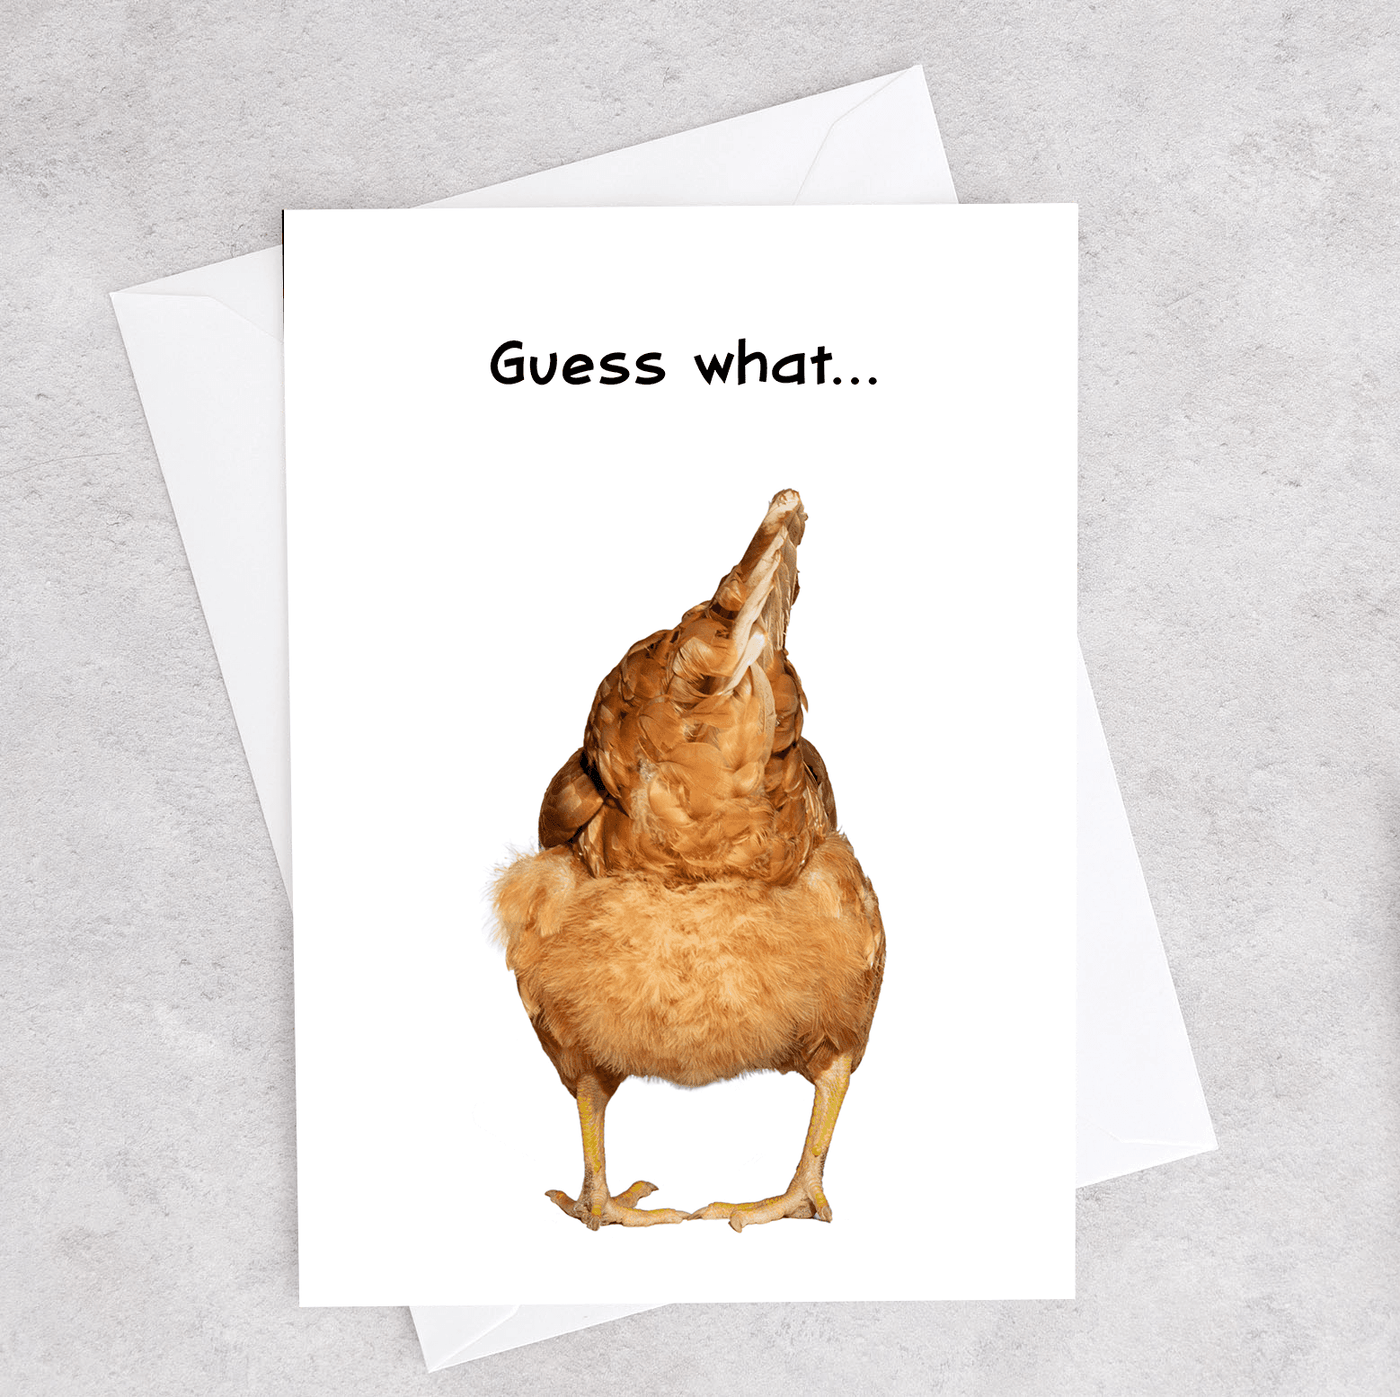 This greeting card show the back / butt of a chicken and says "Guess What?"